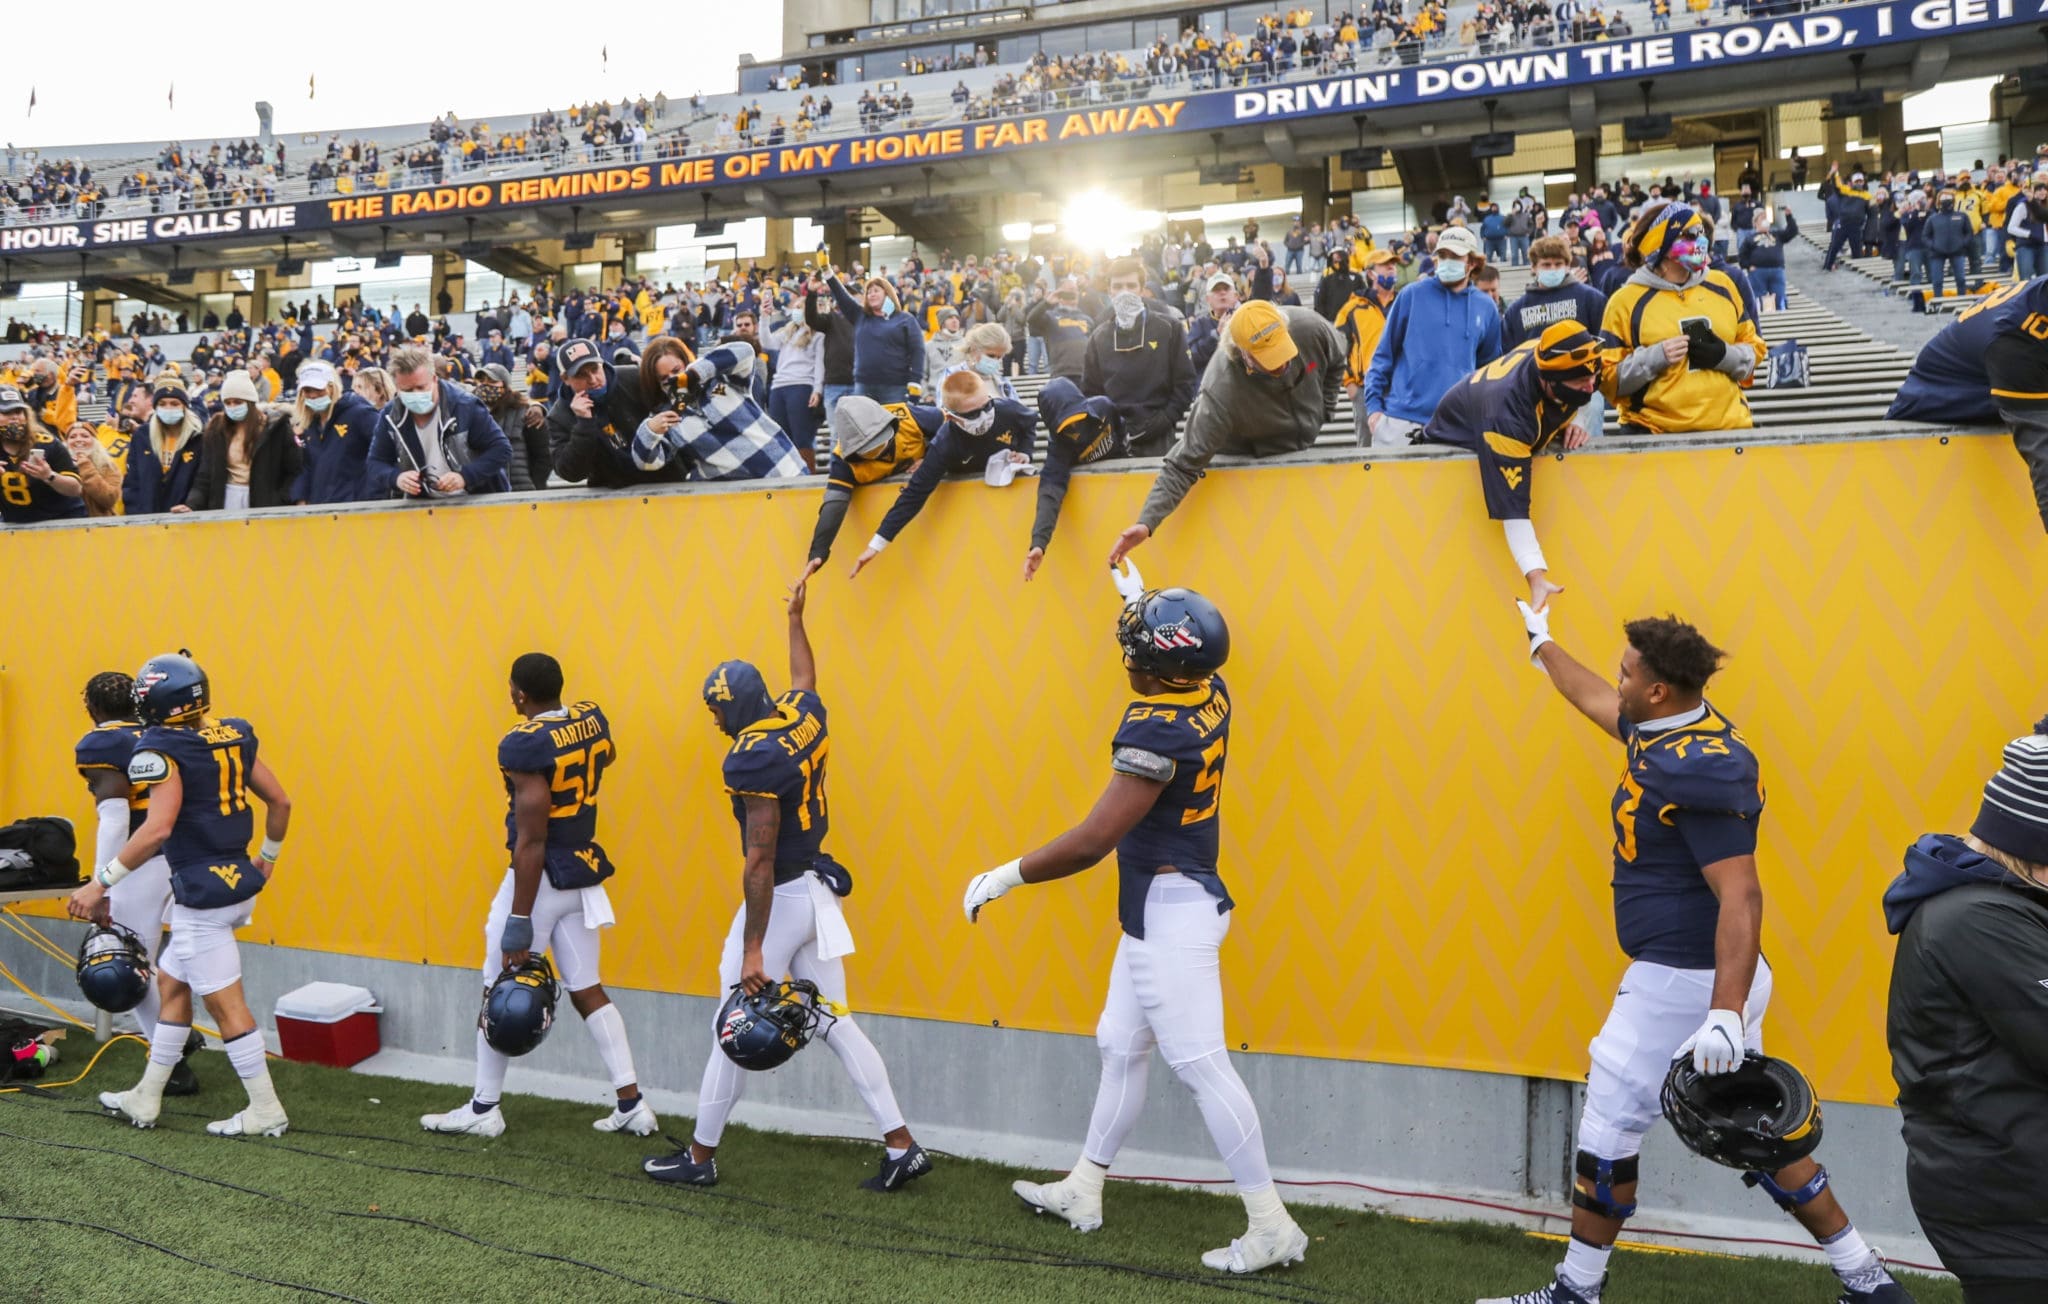 WVU football players and fans